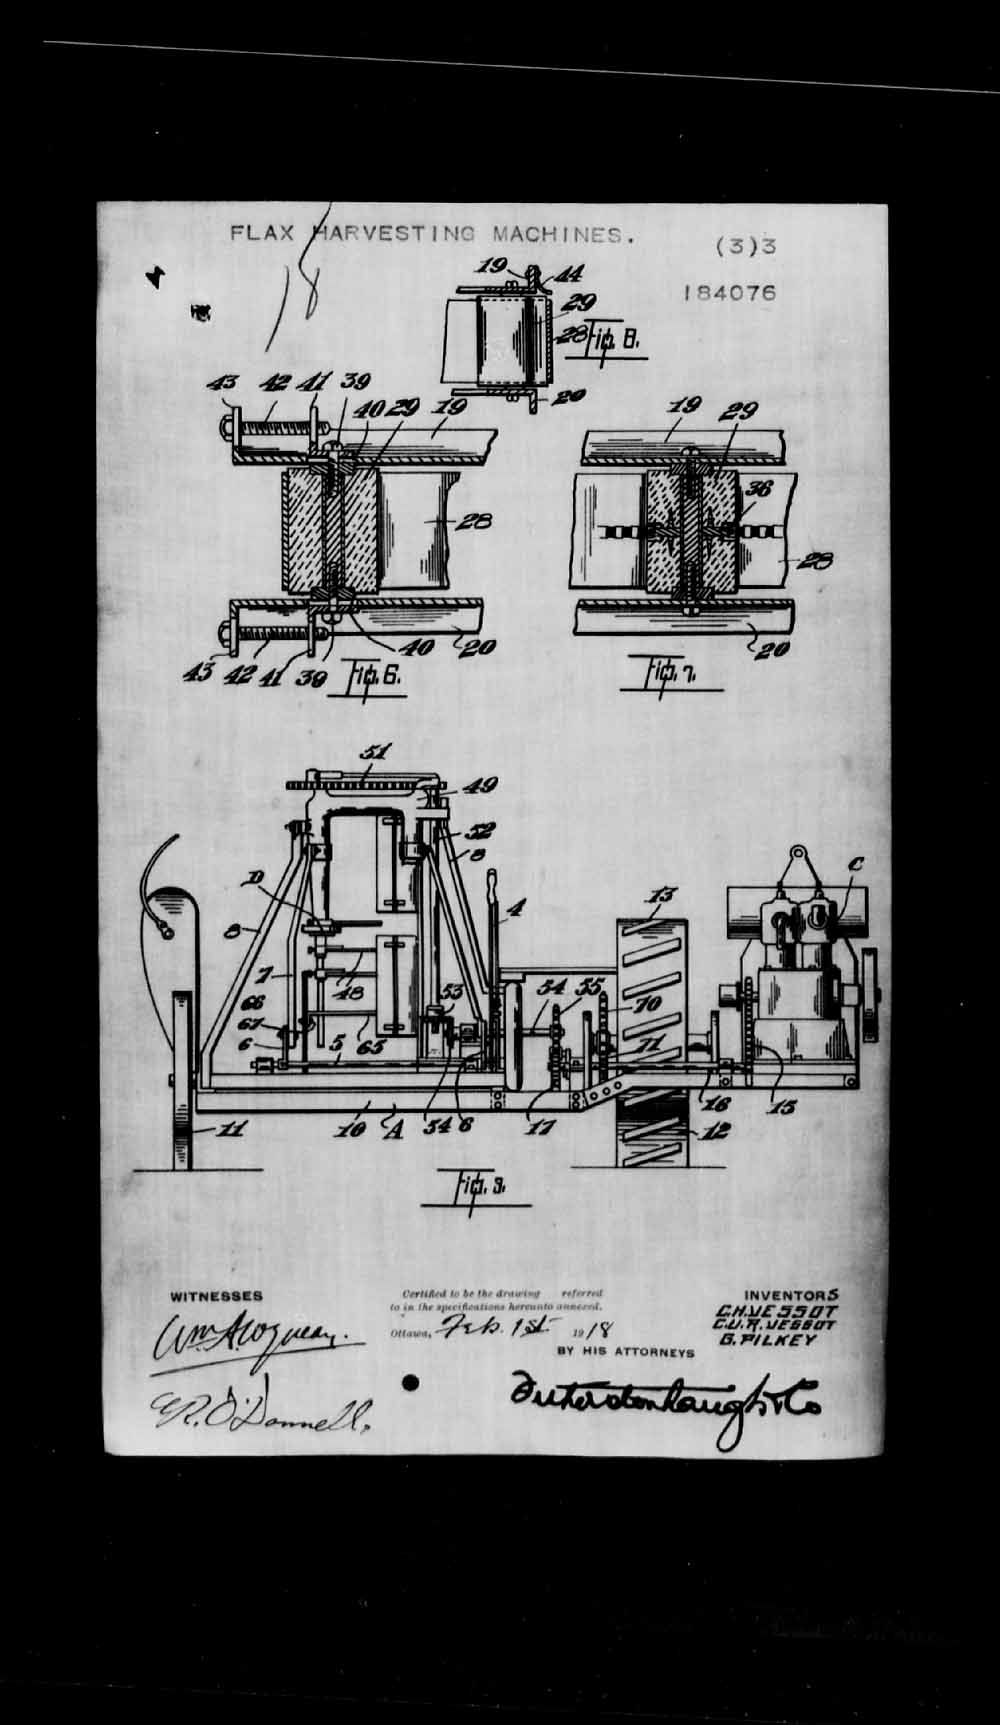 Digitized page of Canadian Patents, 1869-1919 for Image No.: e006652066